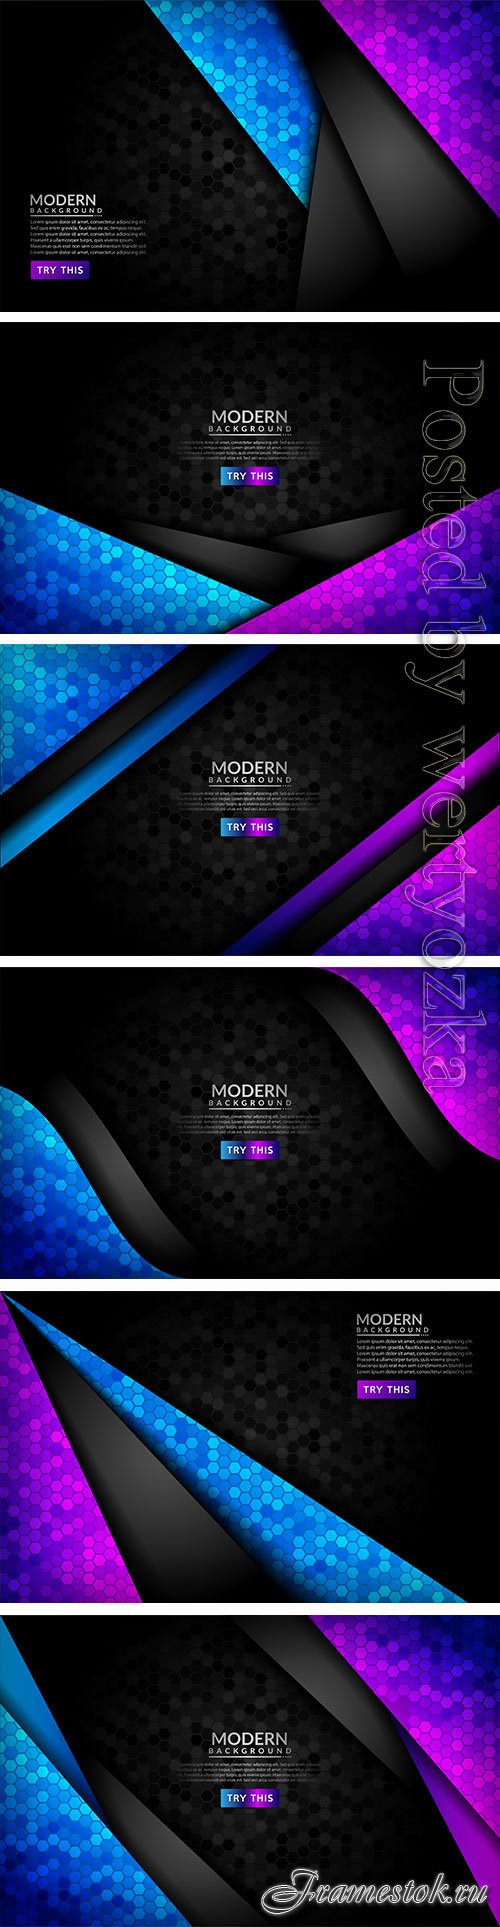 Abstract 3d dark background with purple and blue gradient